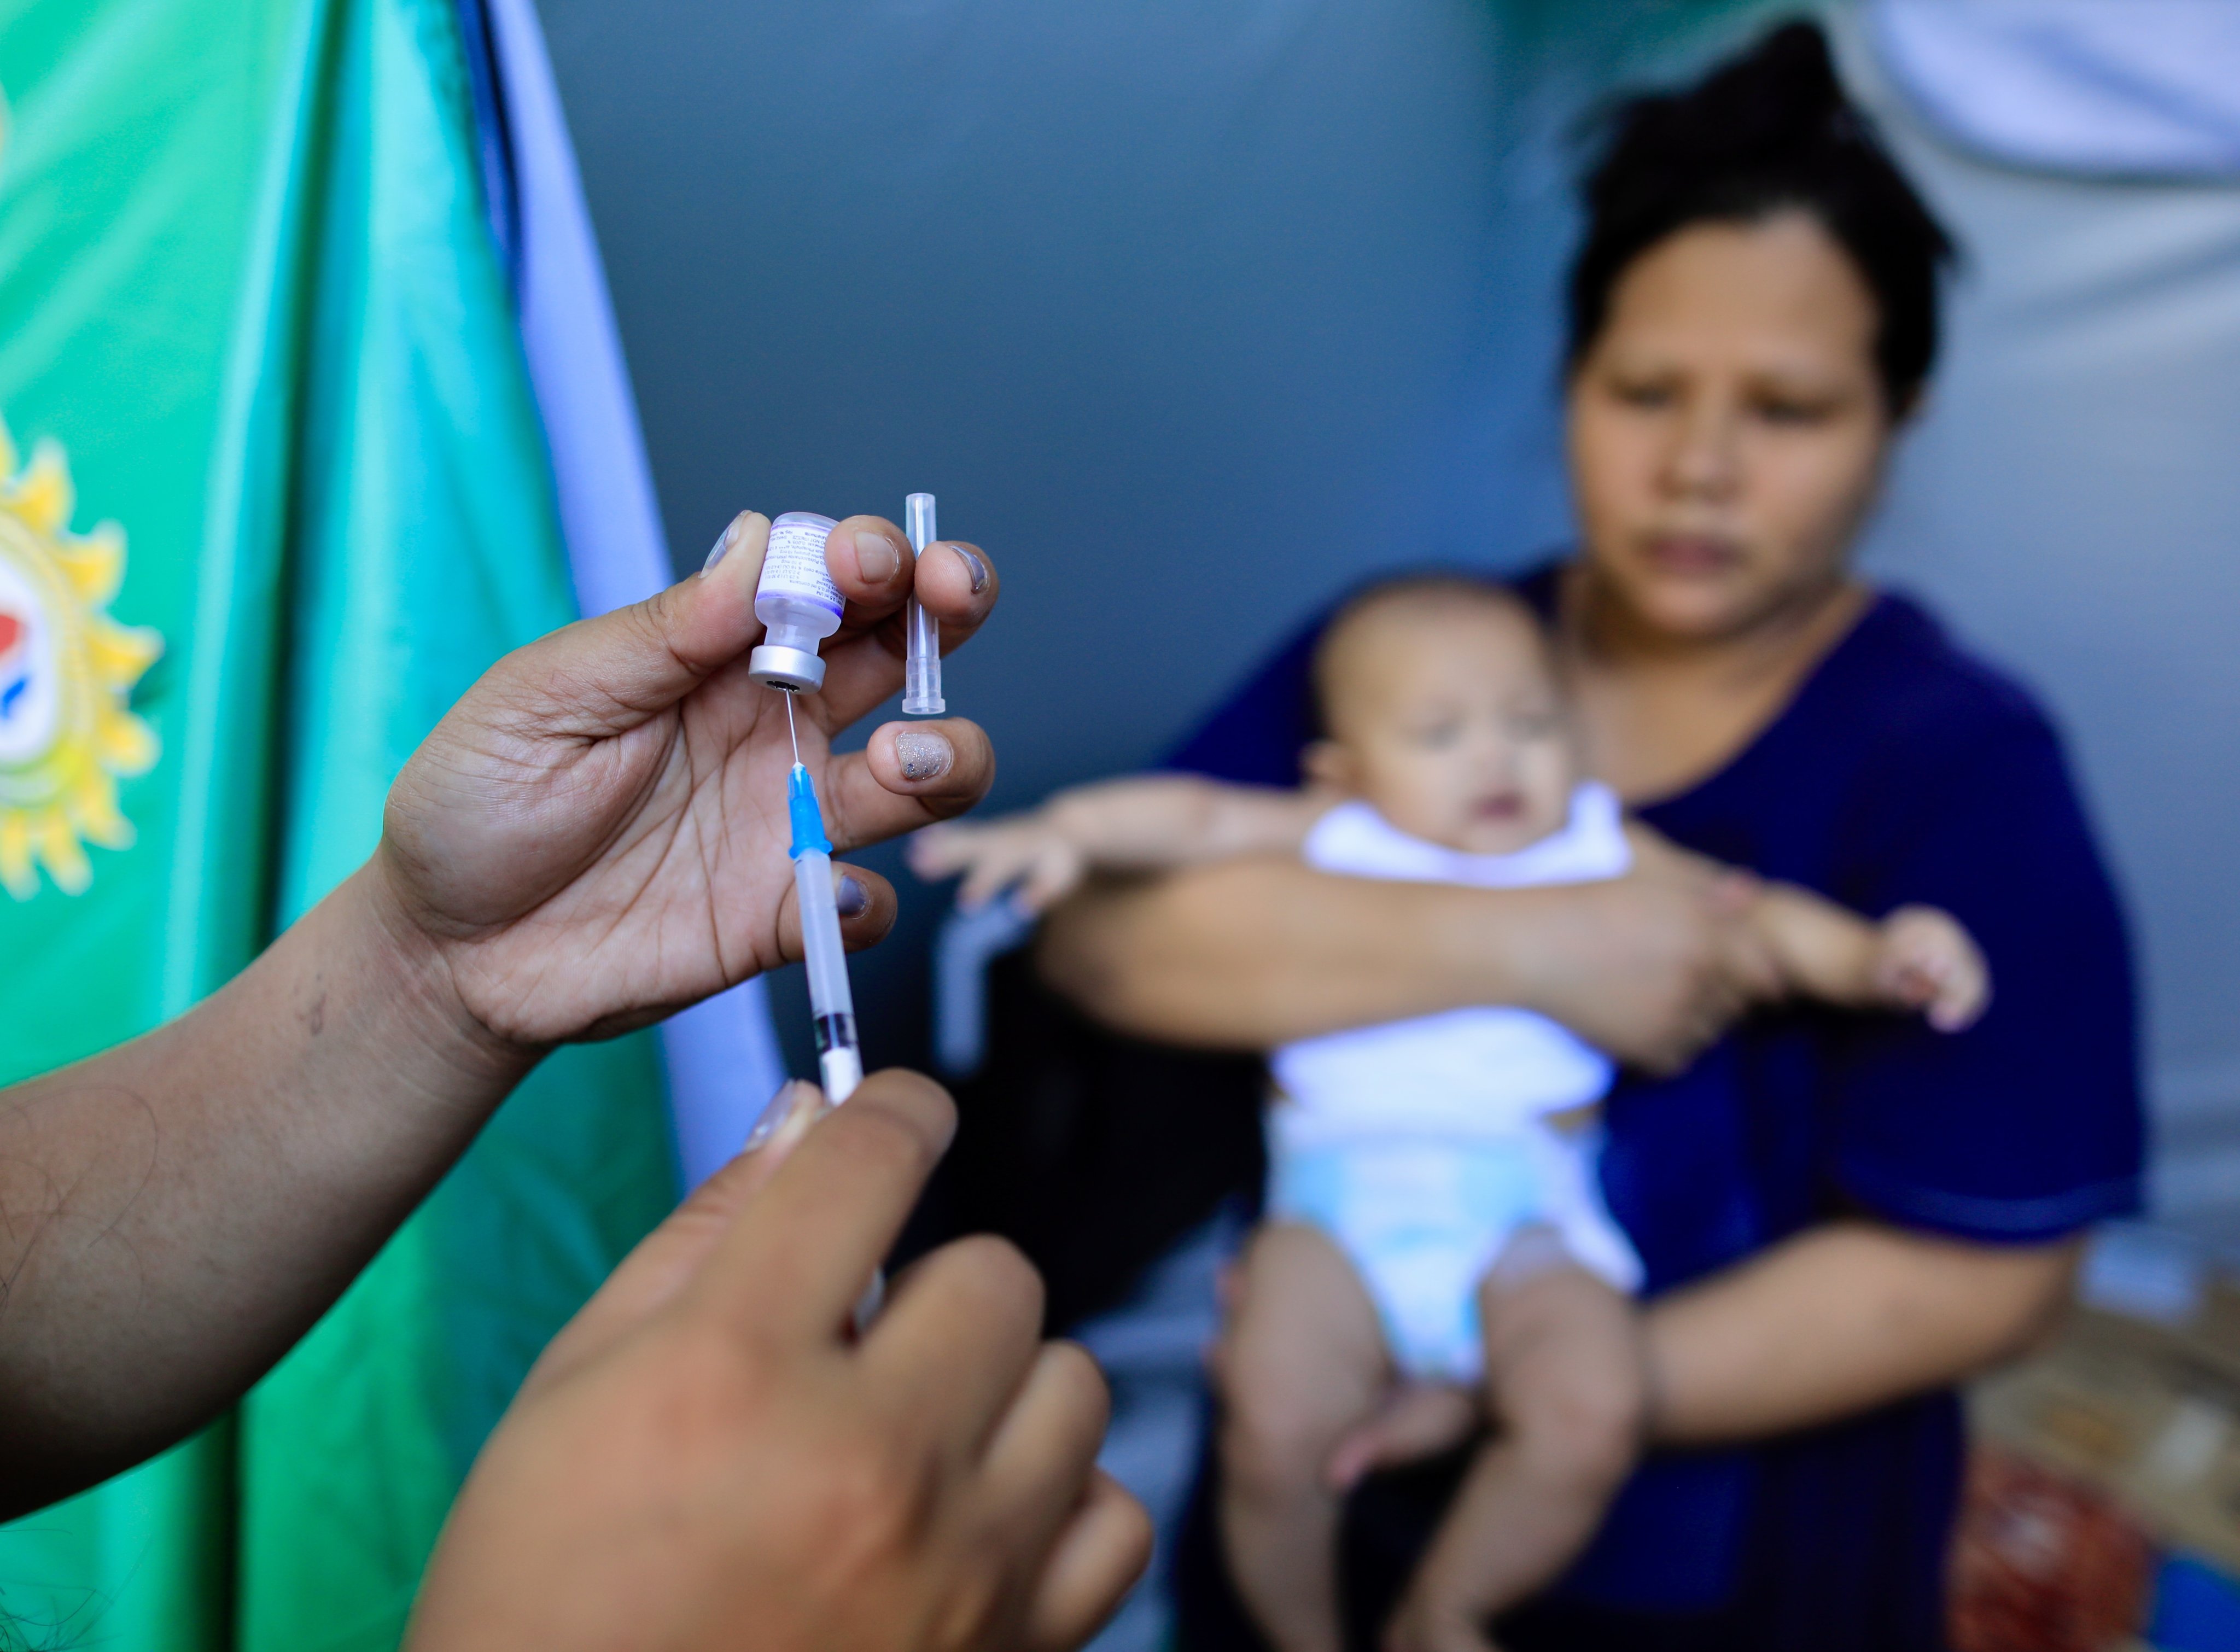 A Filipino health worker prepares a vaccine shot in Paranaque city, Metro Manila. The Philippines has some of the lowest child vaccination rates in the world, according to Unicef data. Photo: EPA-EFE